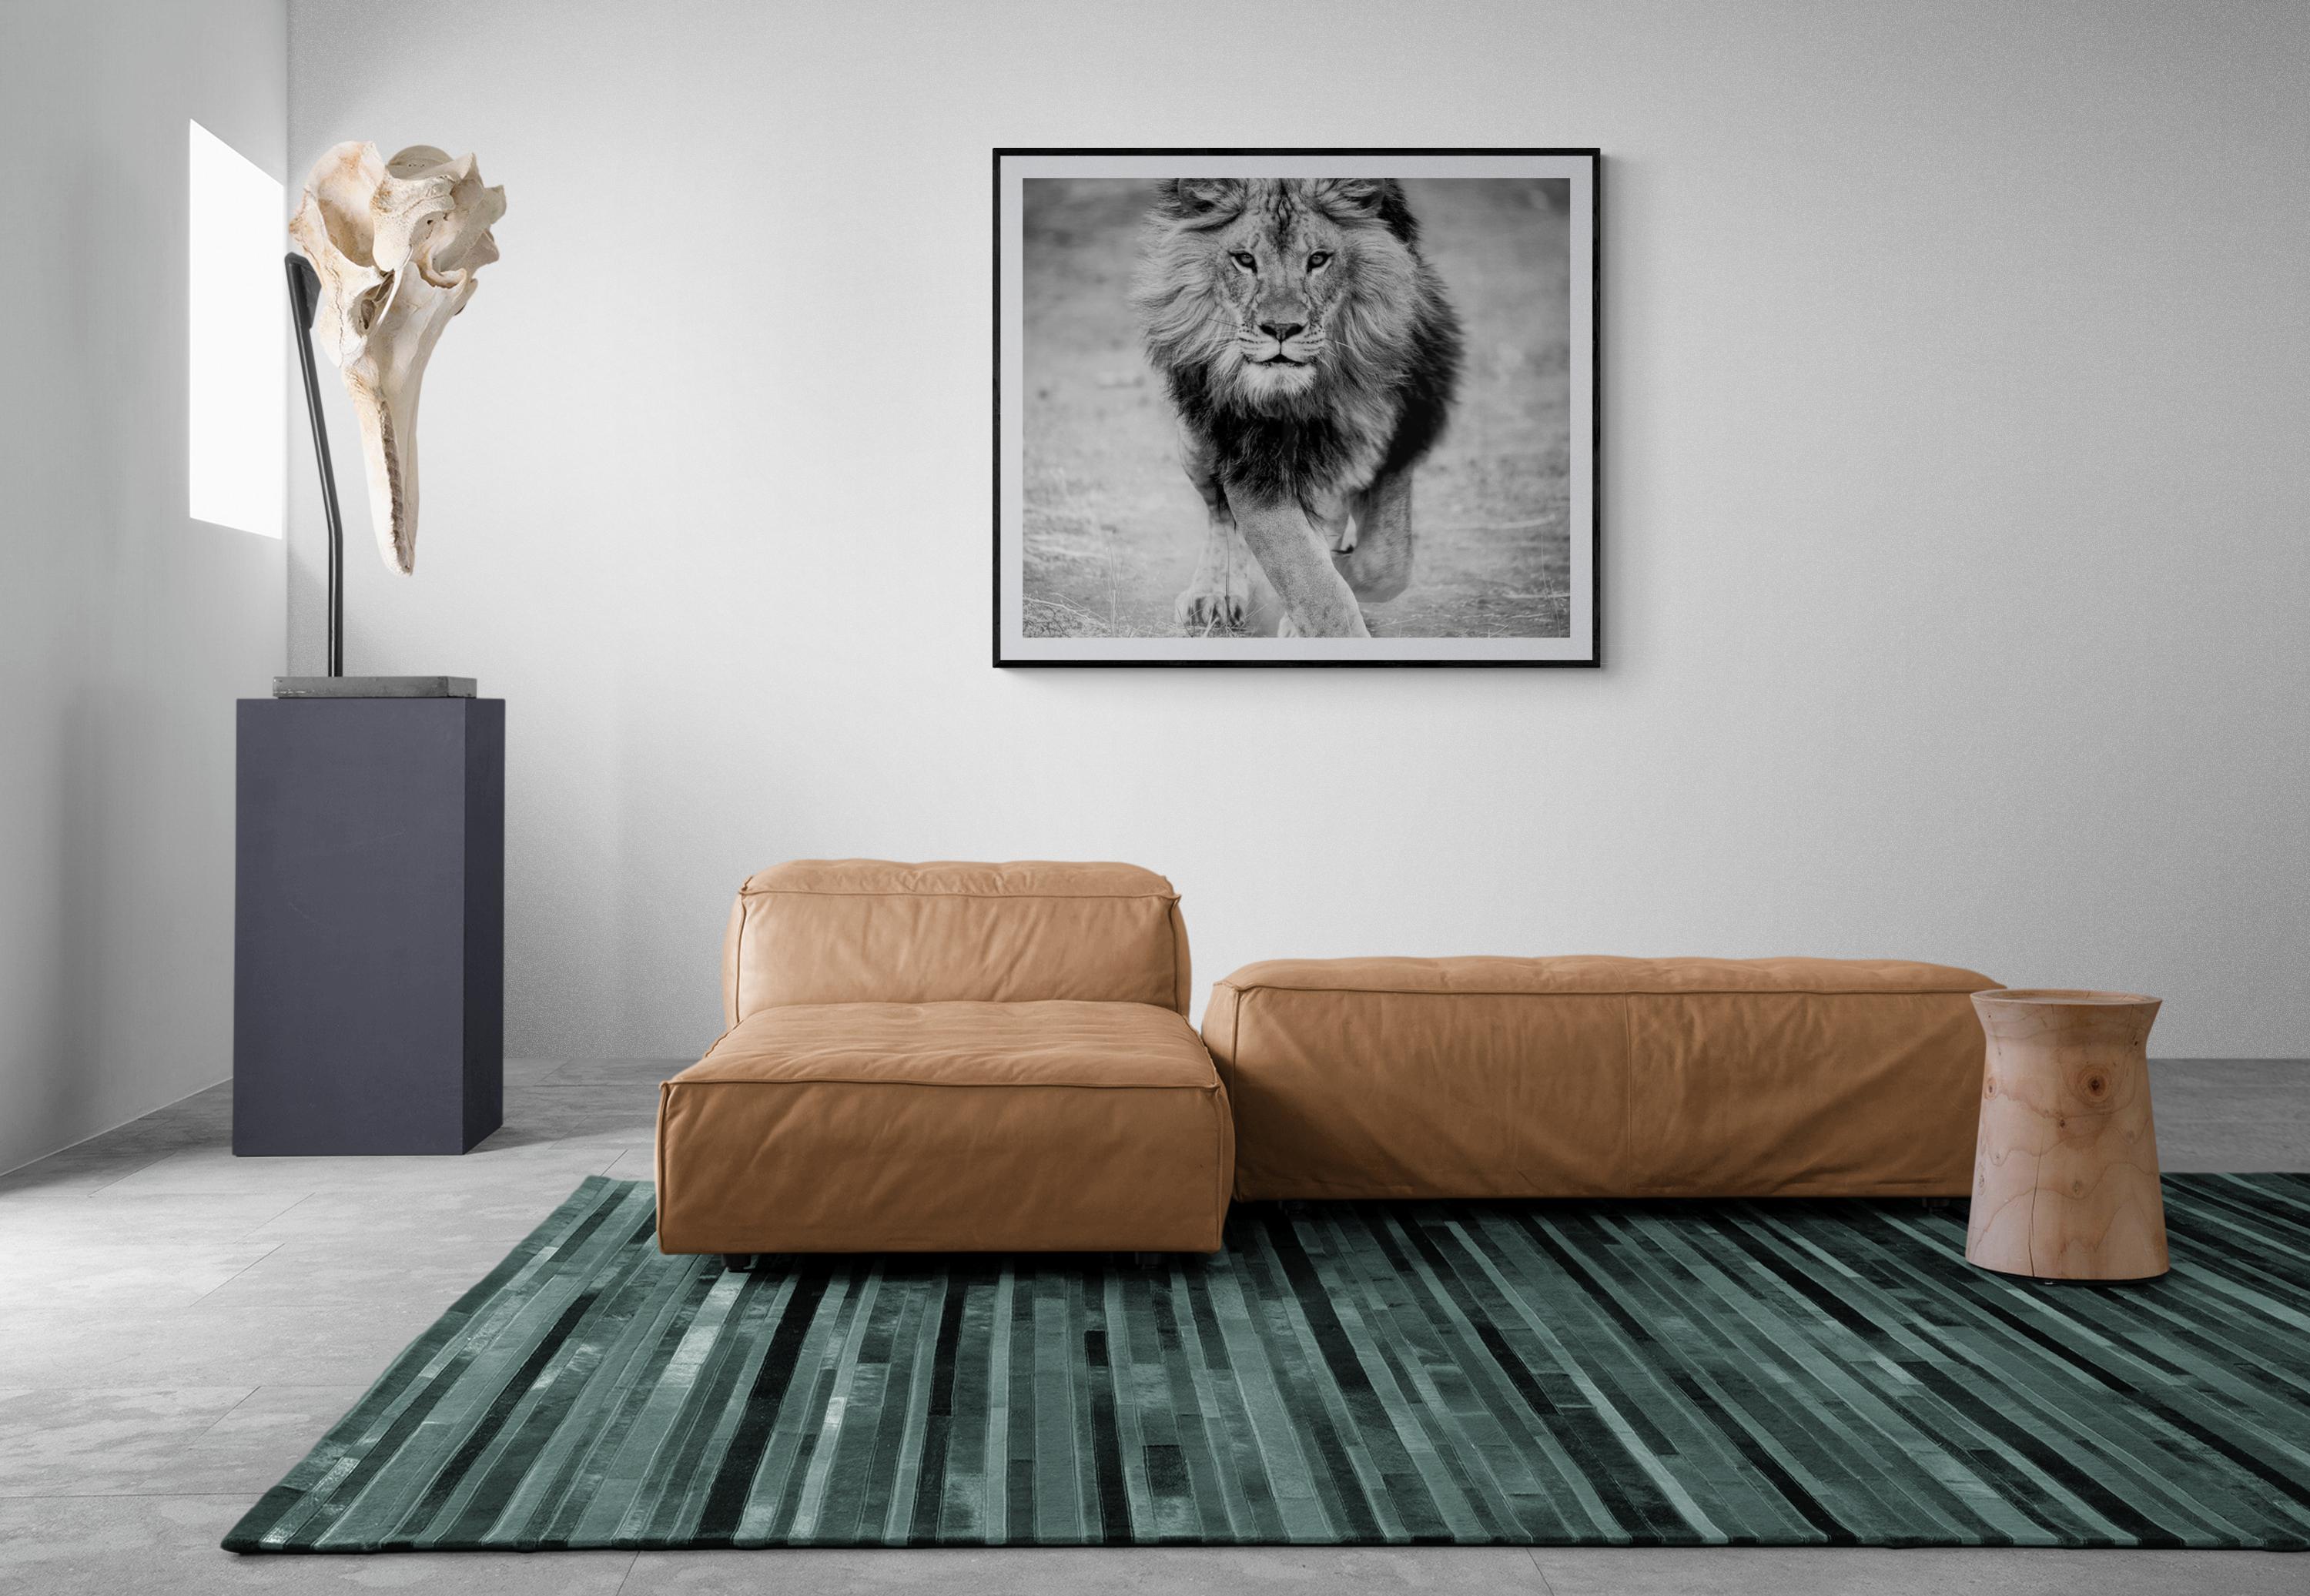 This is a contemporary photograph of an African Lion. 
Printed on archival paper using archival inks.
40x60 Unsigned Print
Printed on archival paper and using archival inks 
Framing available. Inquire for rates.  

 Shane Russeck has built a